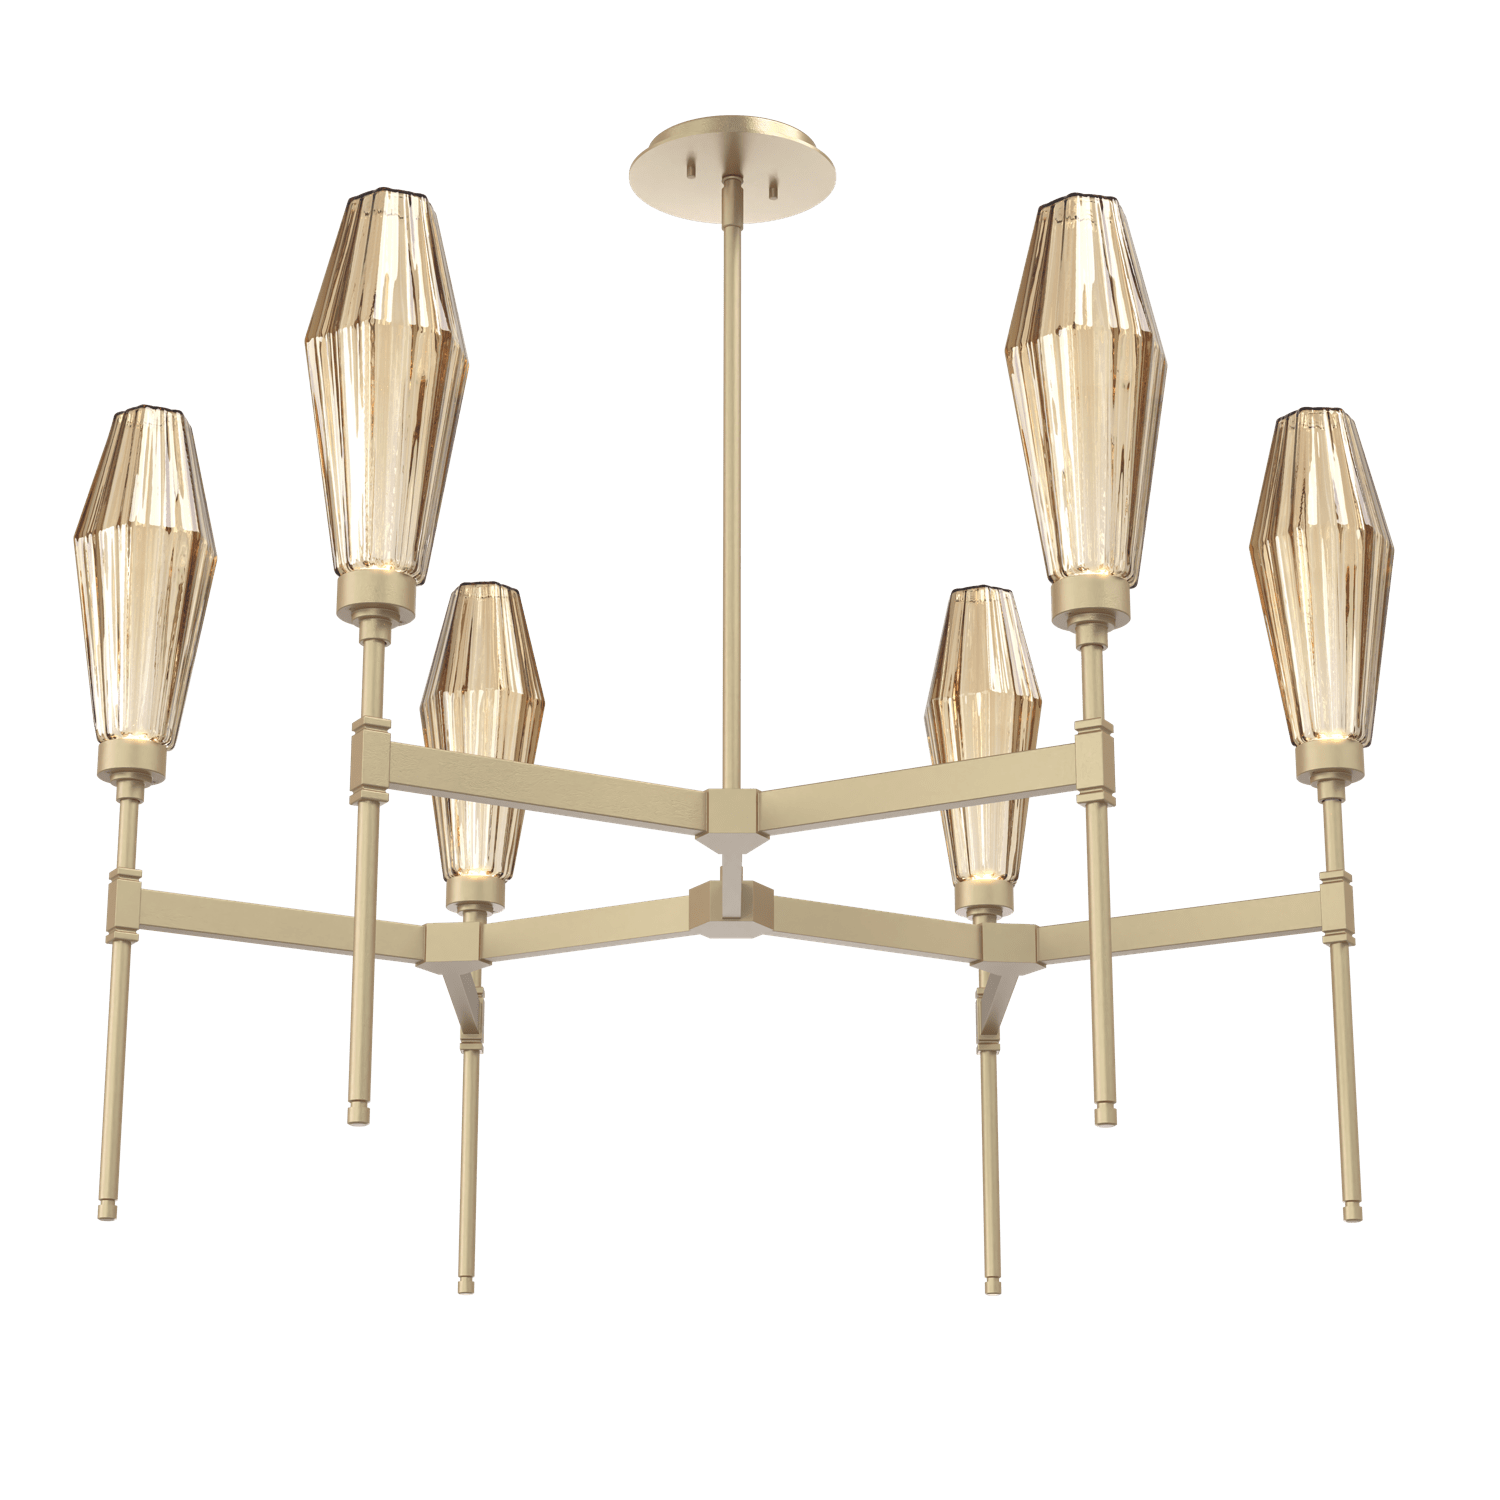 CHB0049-37-GB-RB-Hammerton-Studio-Aalto-37-inch-round-belvedere-chandelier-with-gilded-brass-finish-and-optic-ribbed-bronze-glass-shades-and-LED-lamping